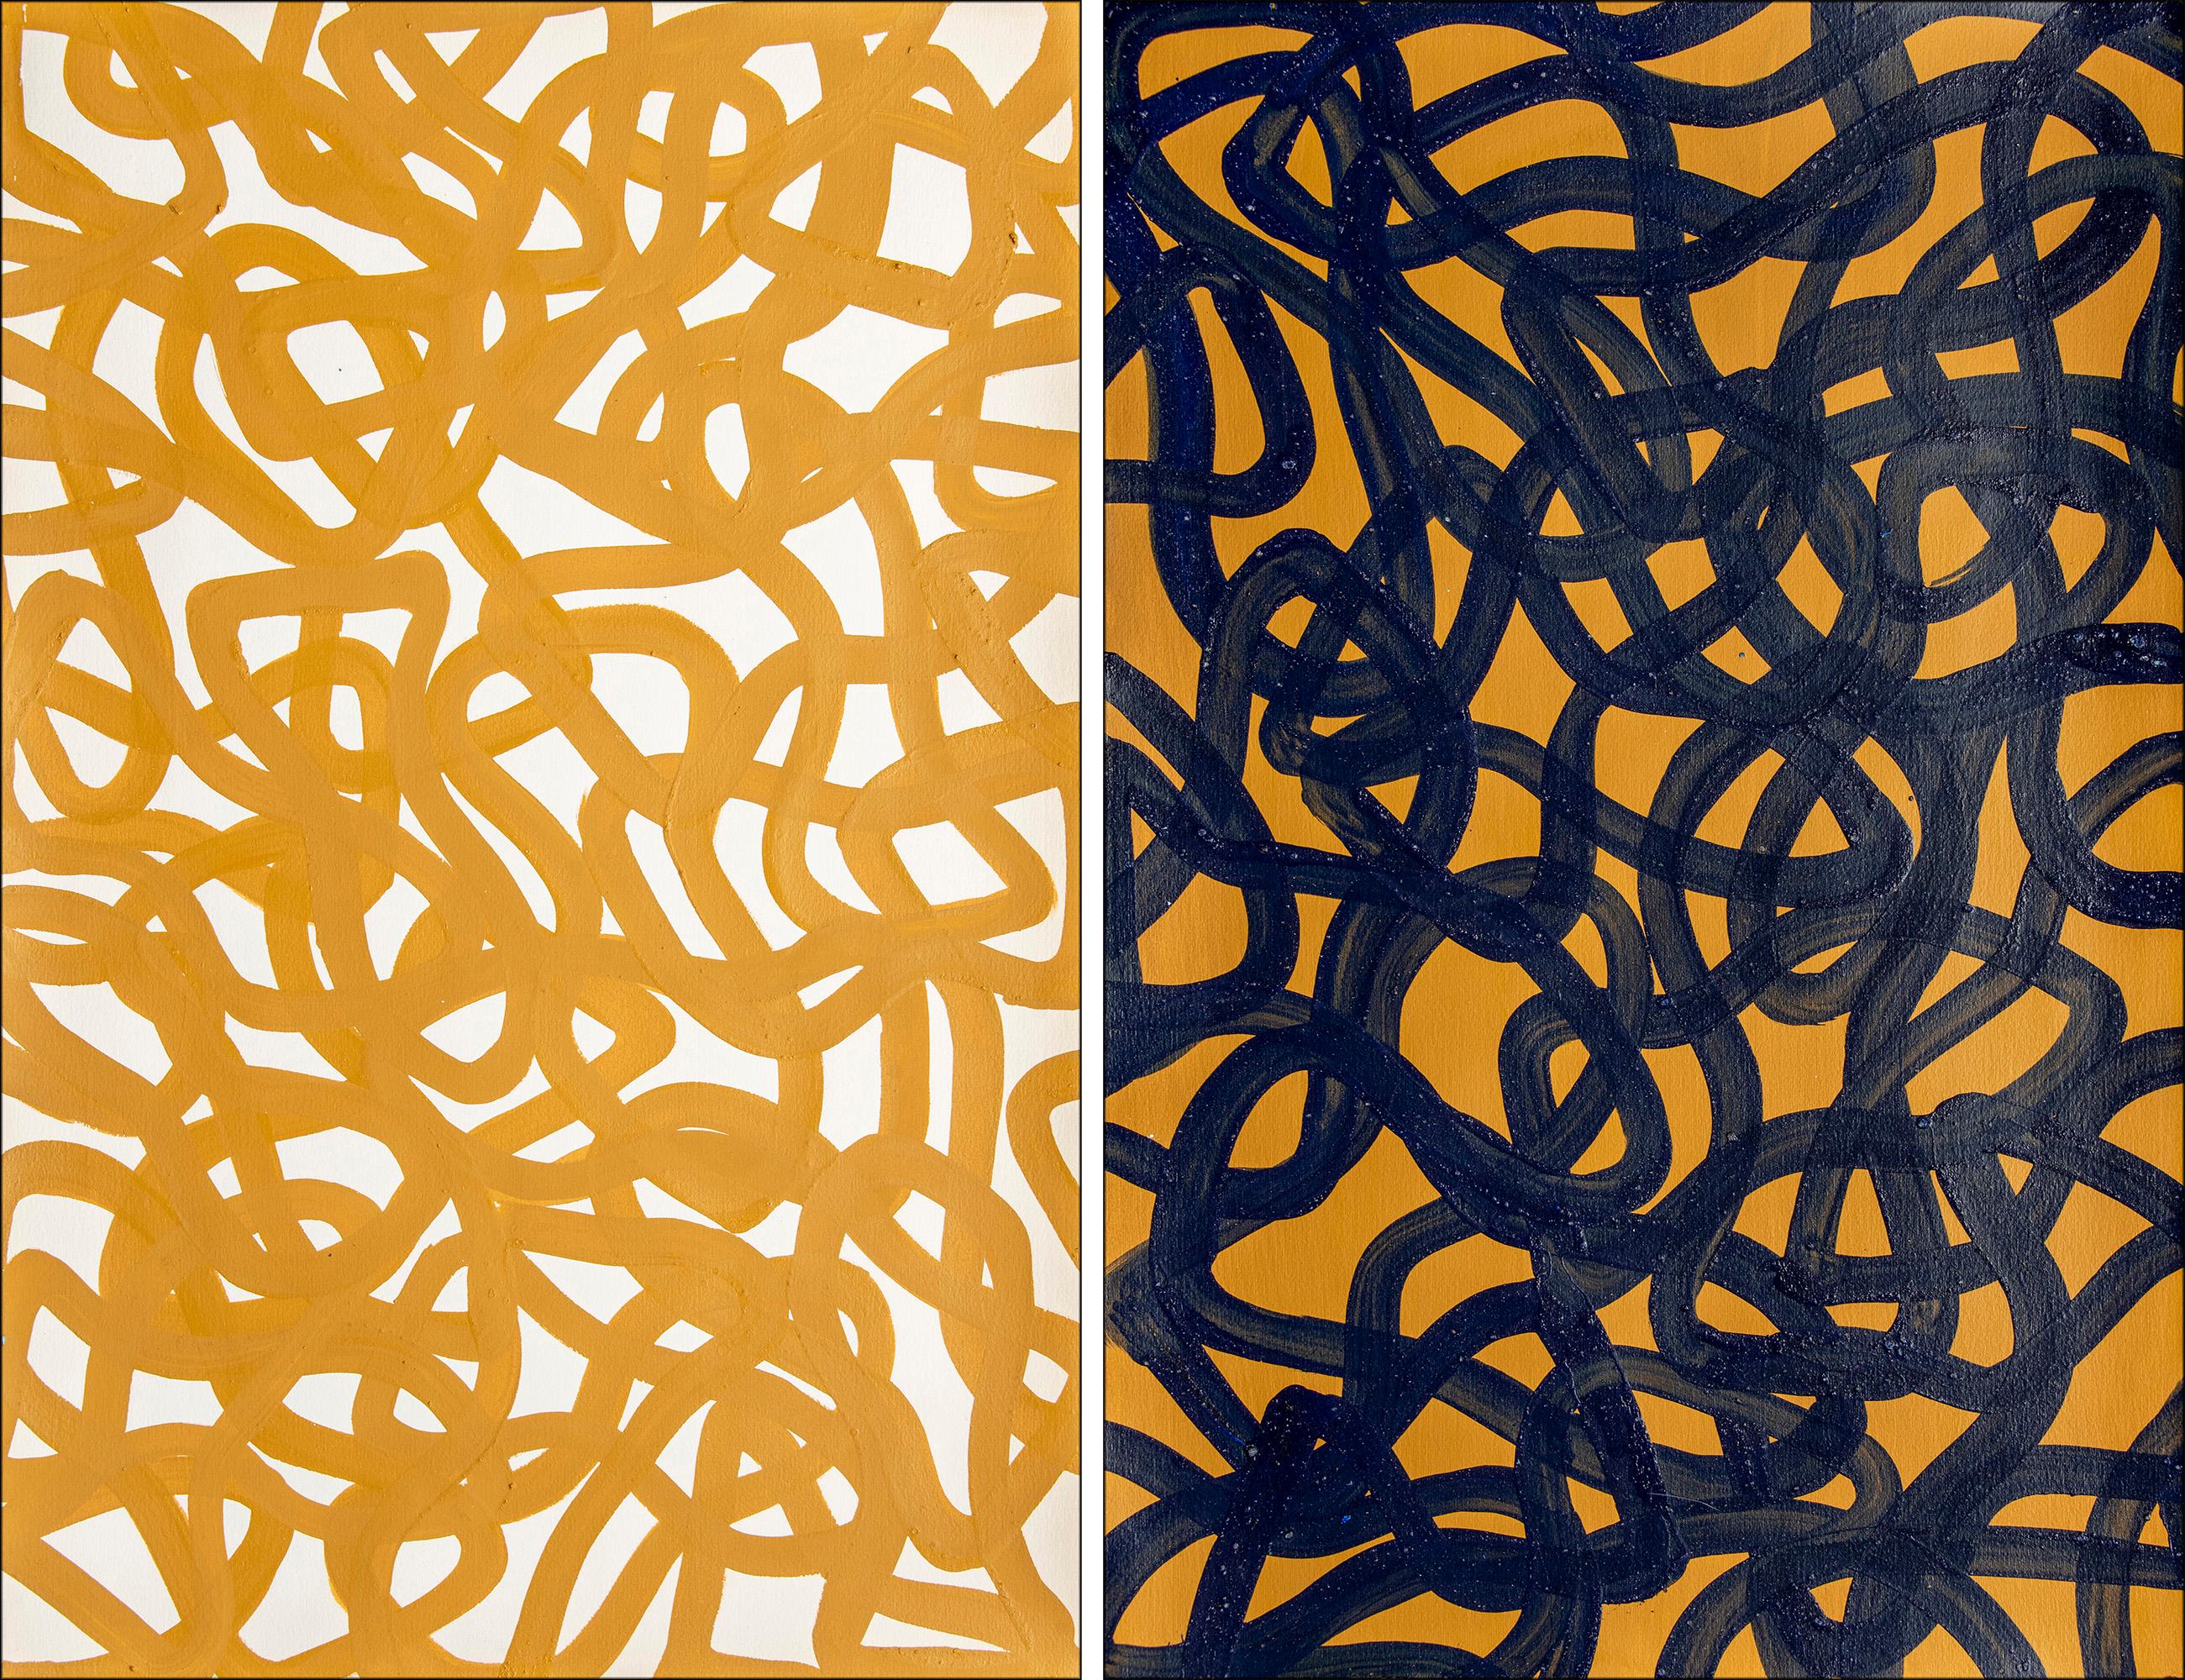 Ochre and Black Diptych, Overlapping White Abstract Fish Gestures, Mediterranean